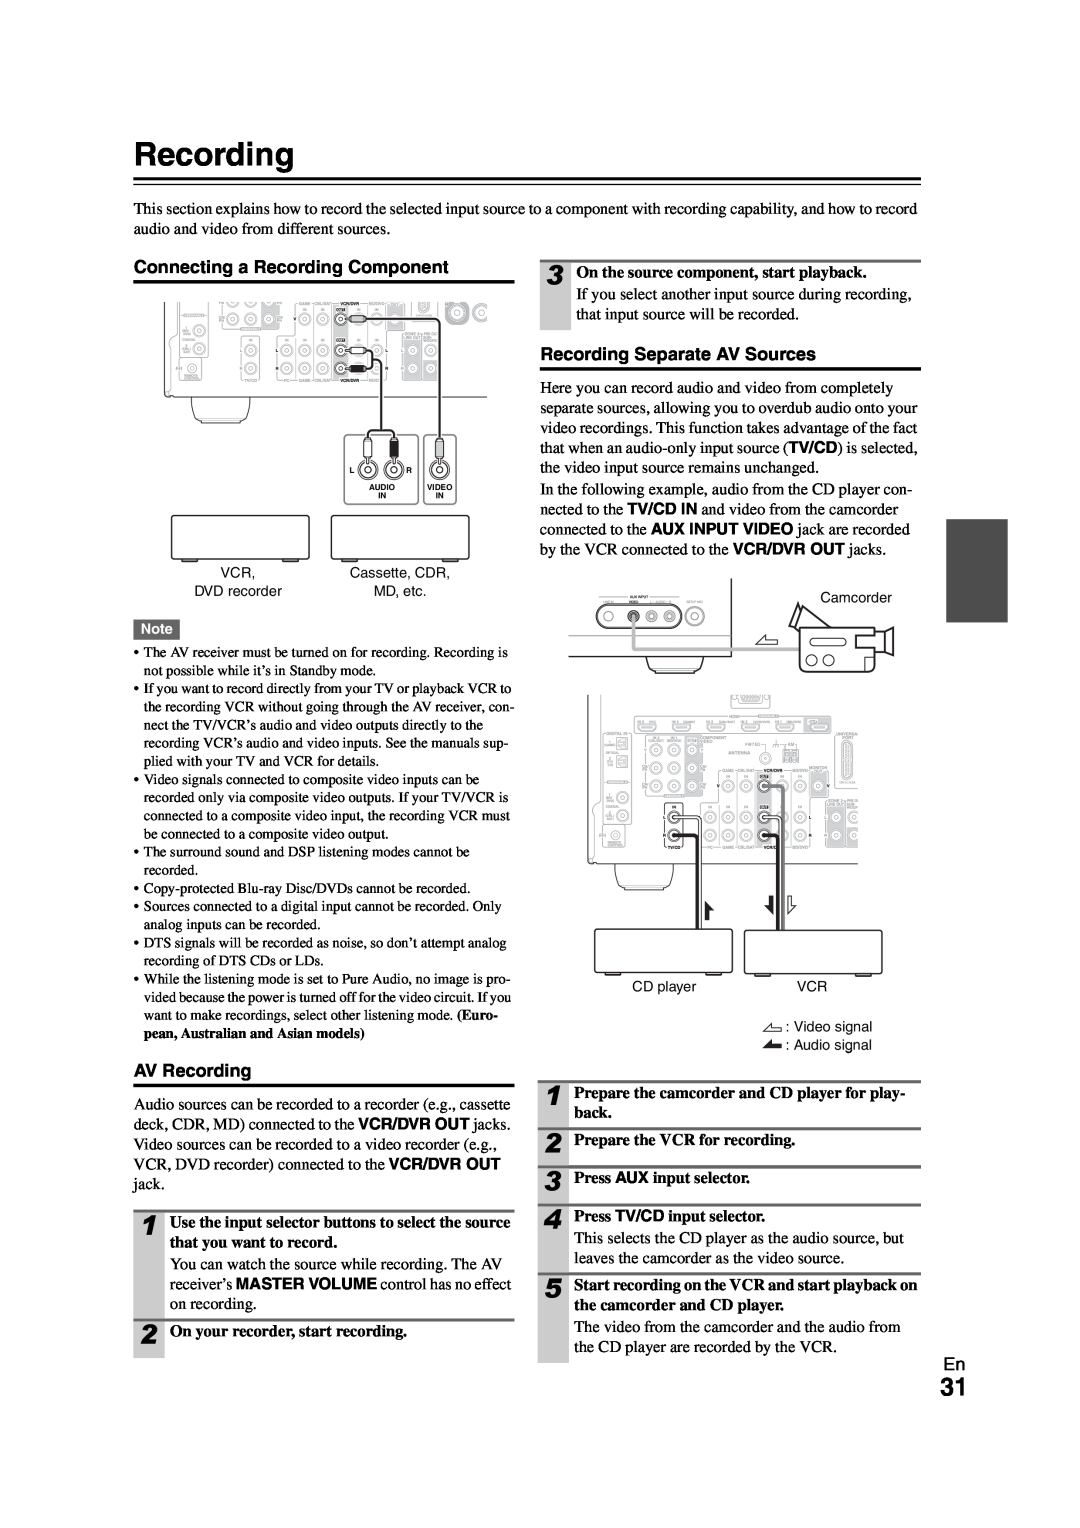 Onkyo SR608 instruction manual Connecting a Recording Component, Recording Separate AV Sources, AV Recording 